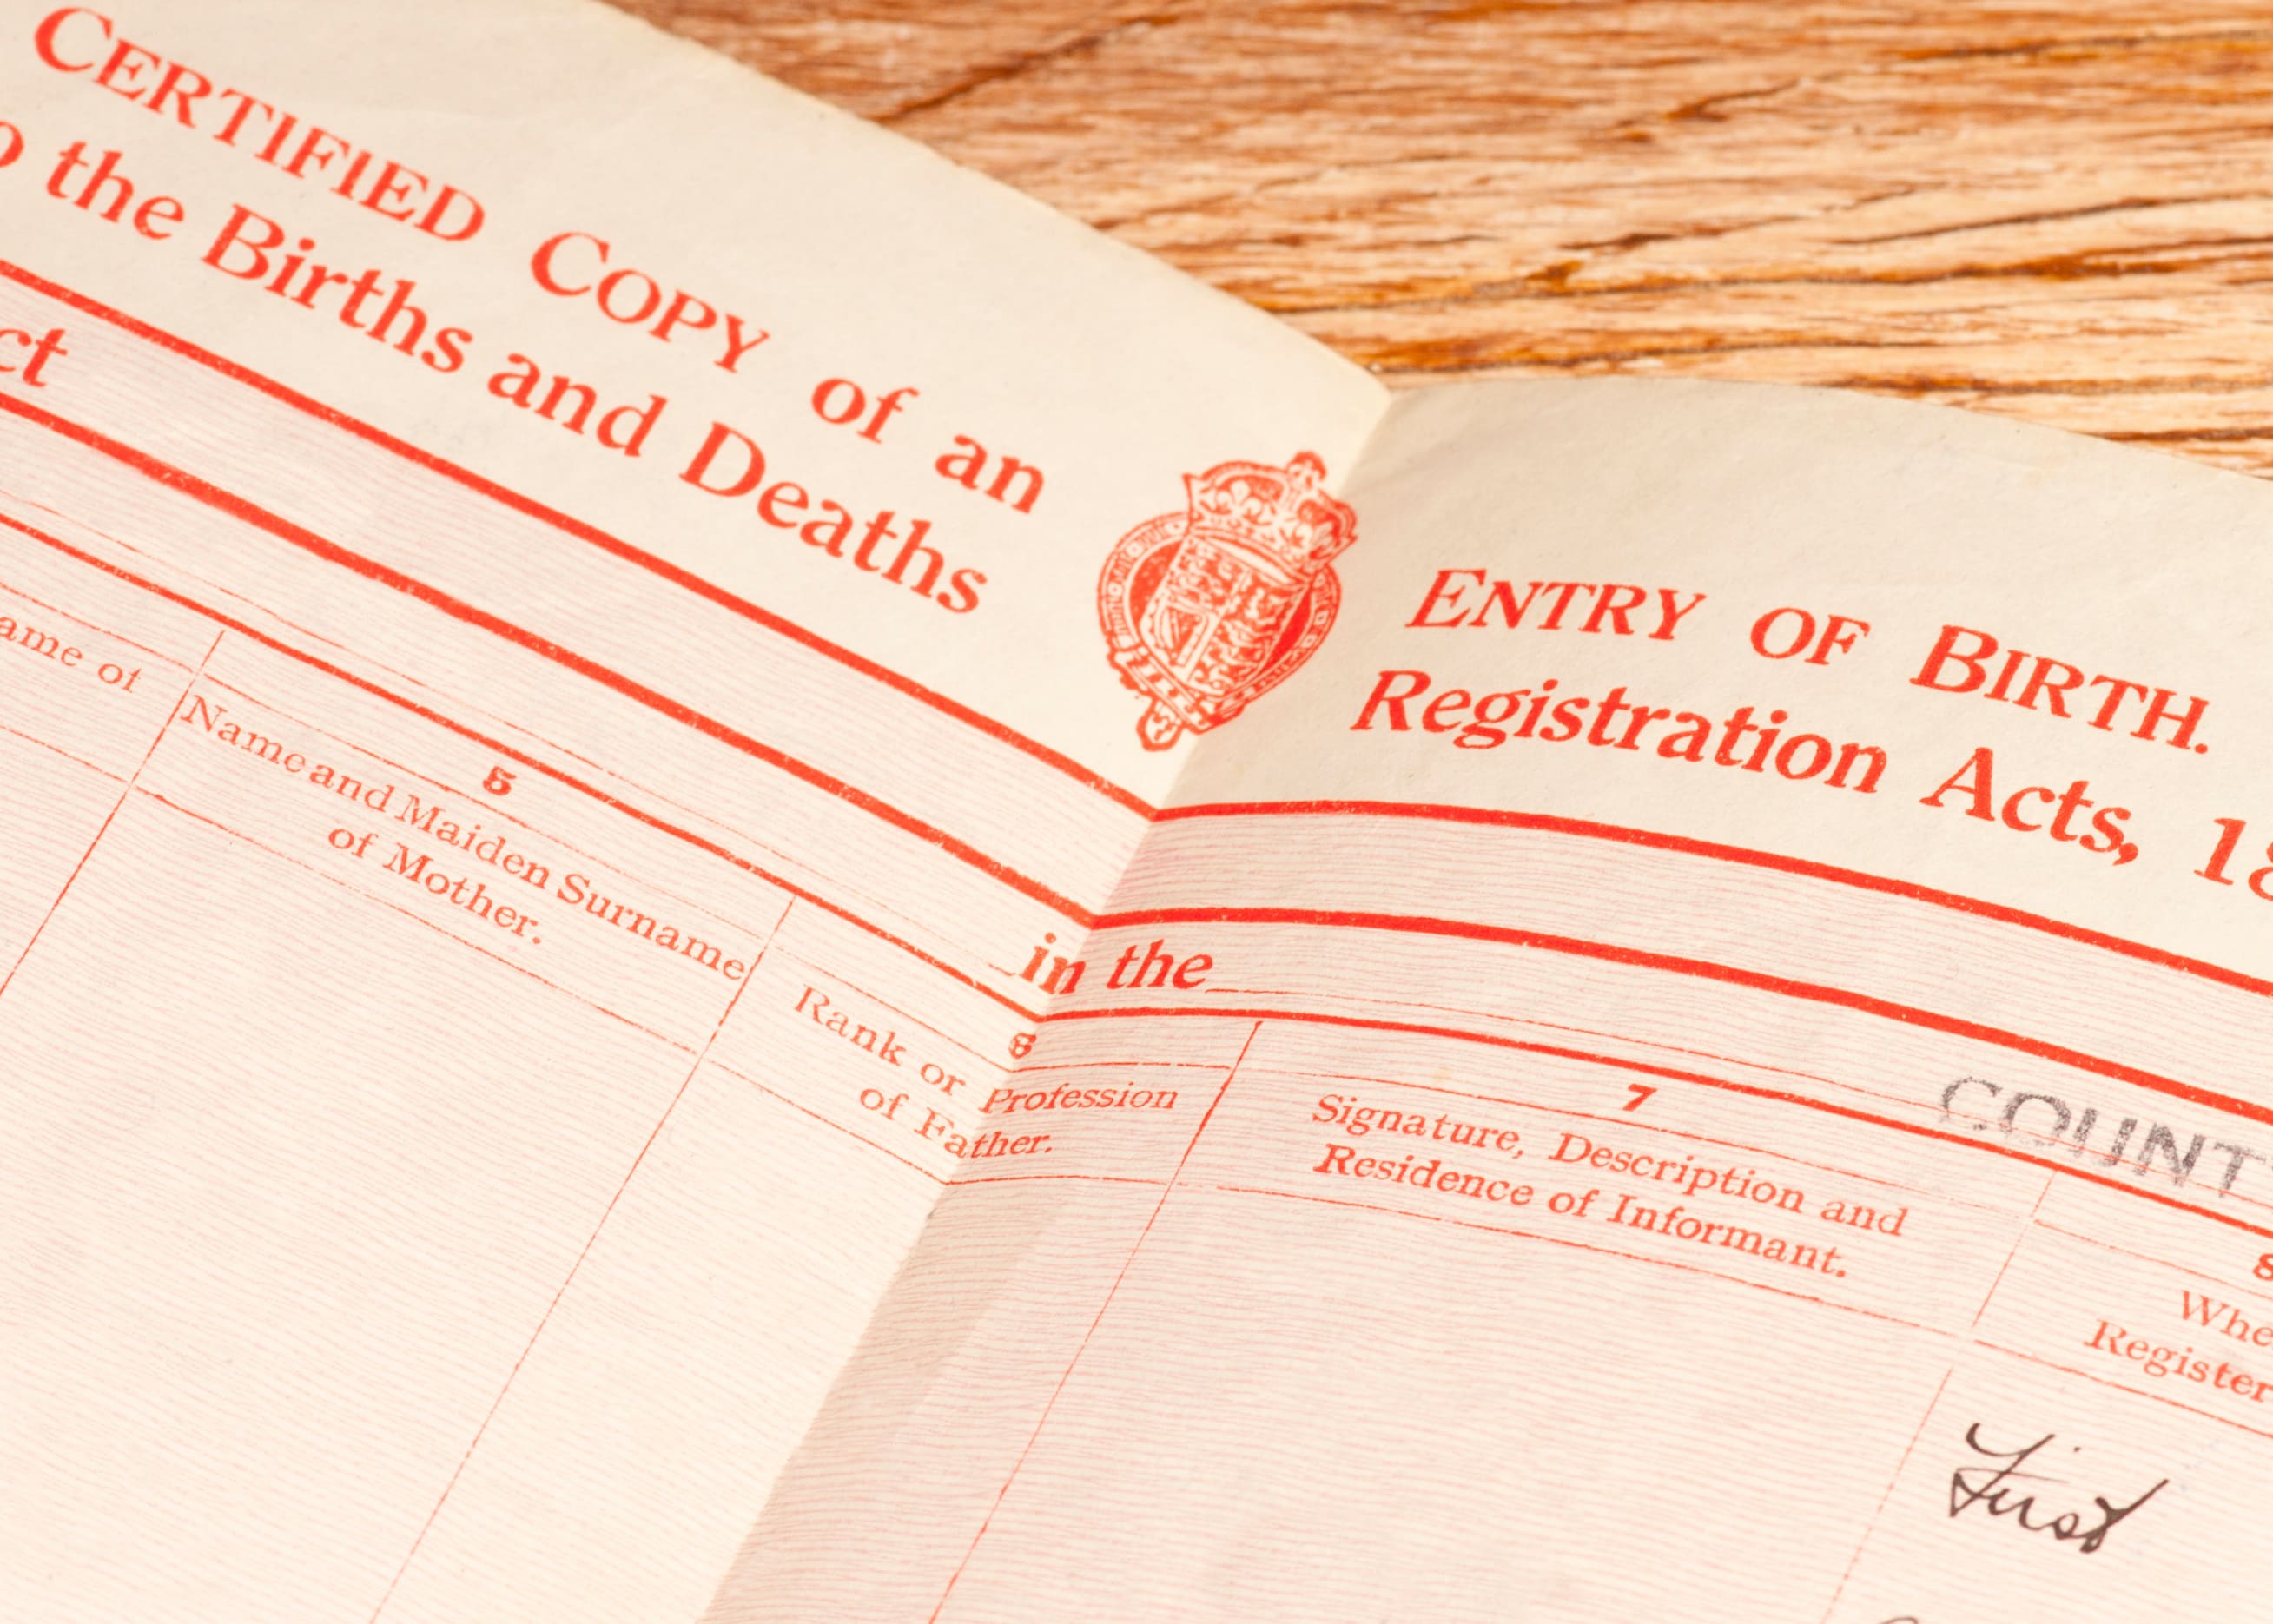 Certfied Copy Of Birth And Death Records TX DPS